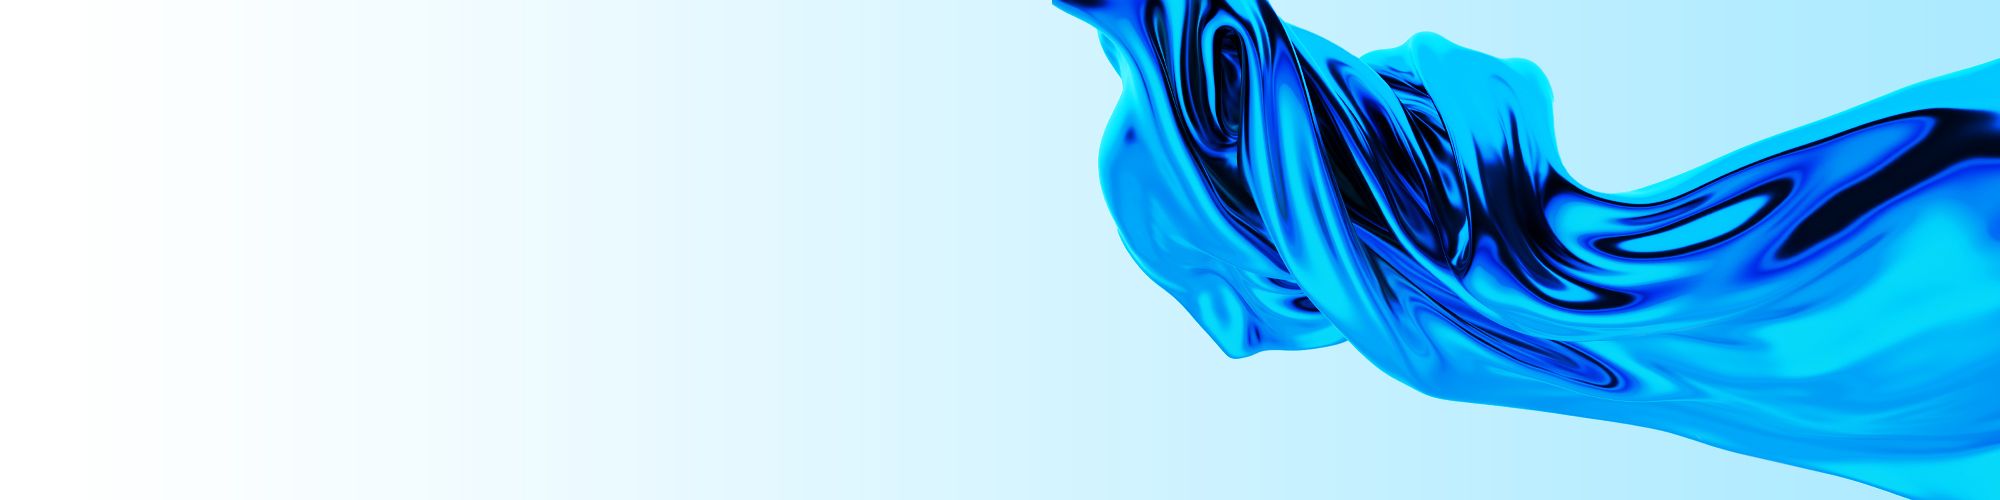 blue wavy abstract pattern banner